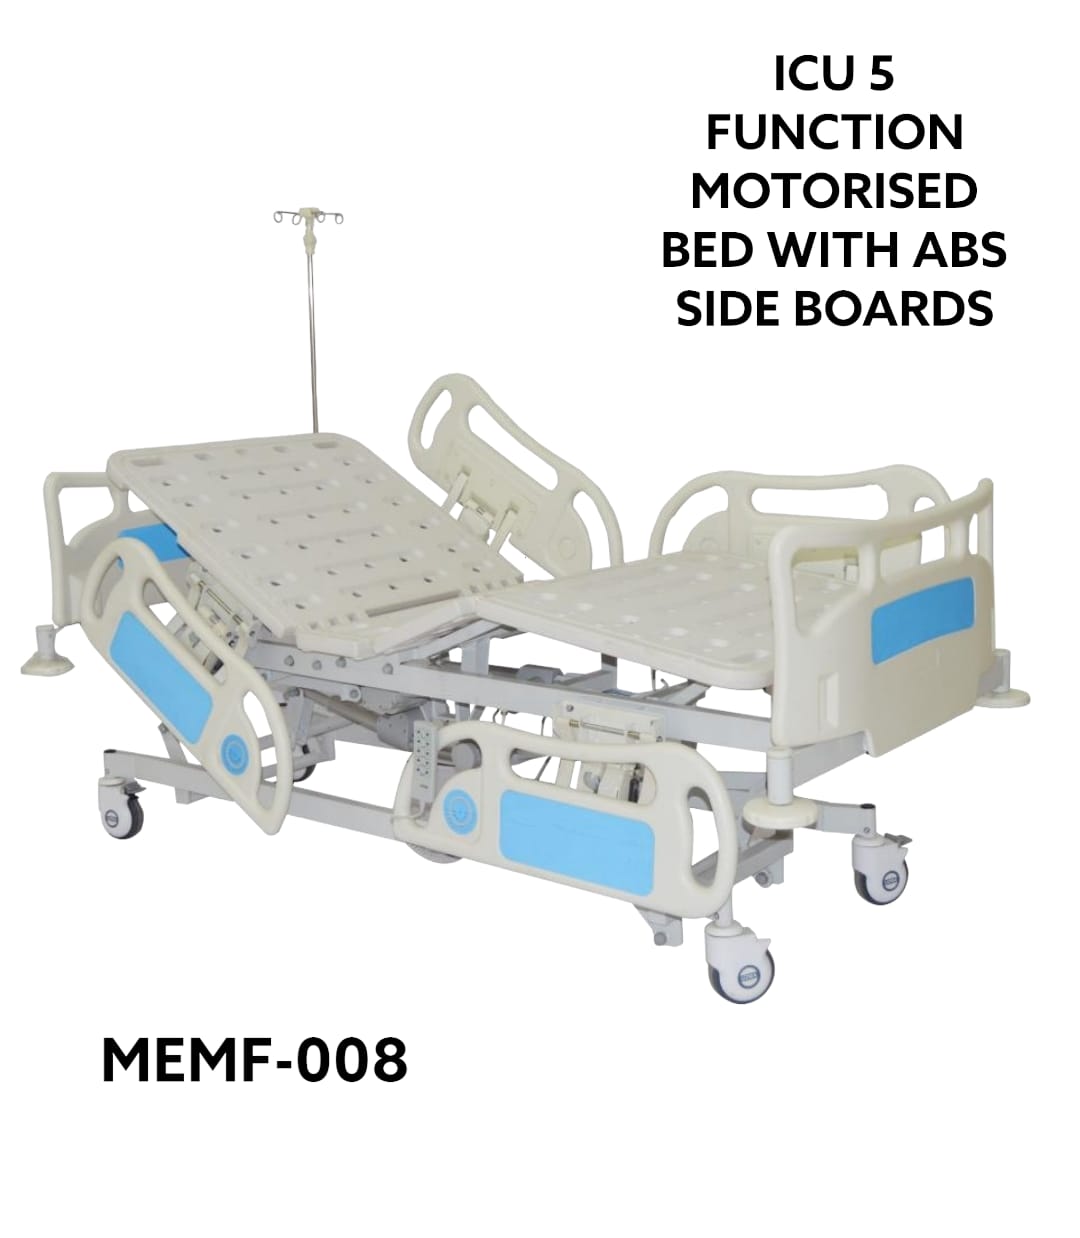 ICU 5 FUNCTION MOTORISED BED WITH ABS SIDE BOARDS